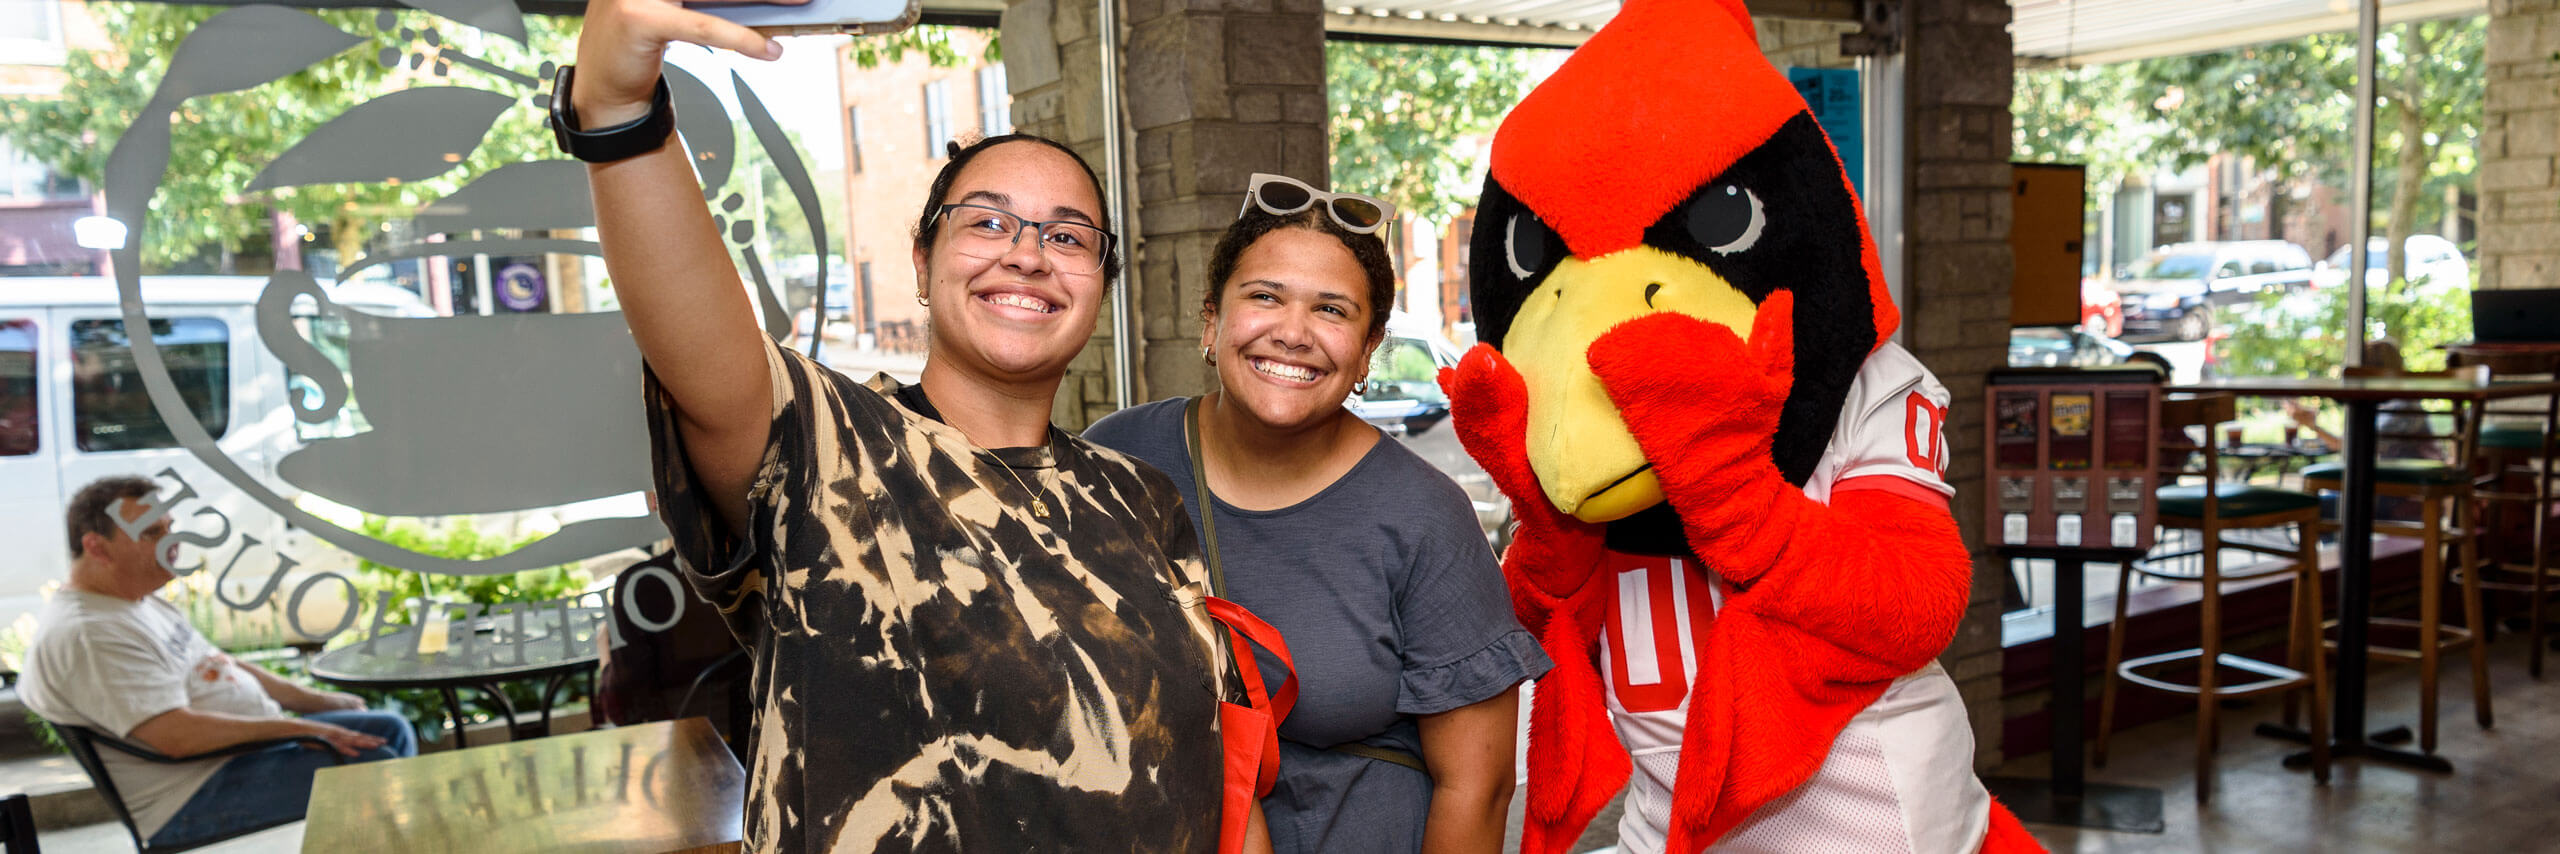 Explore the Campus and Community | Welcome Week | Illinois State